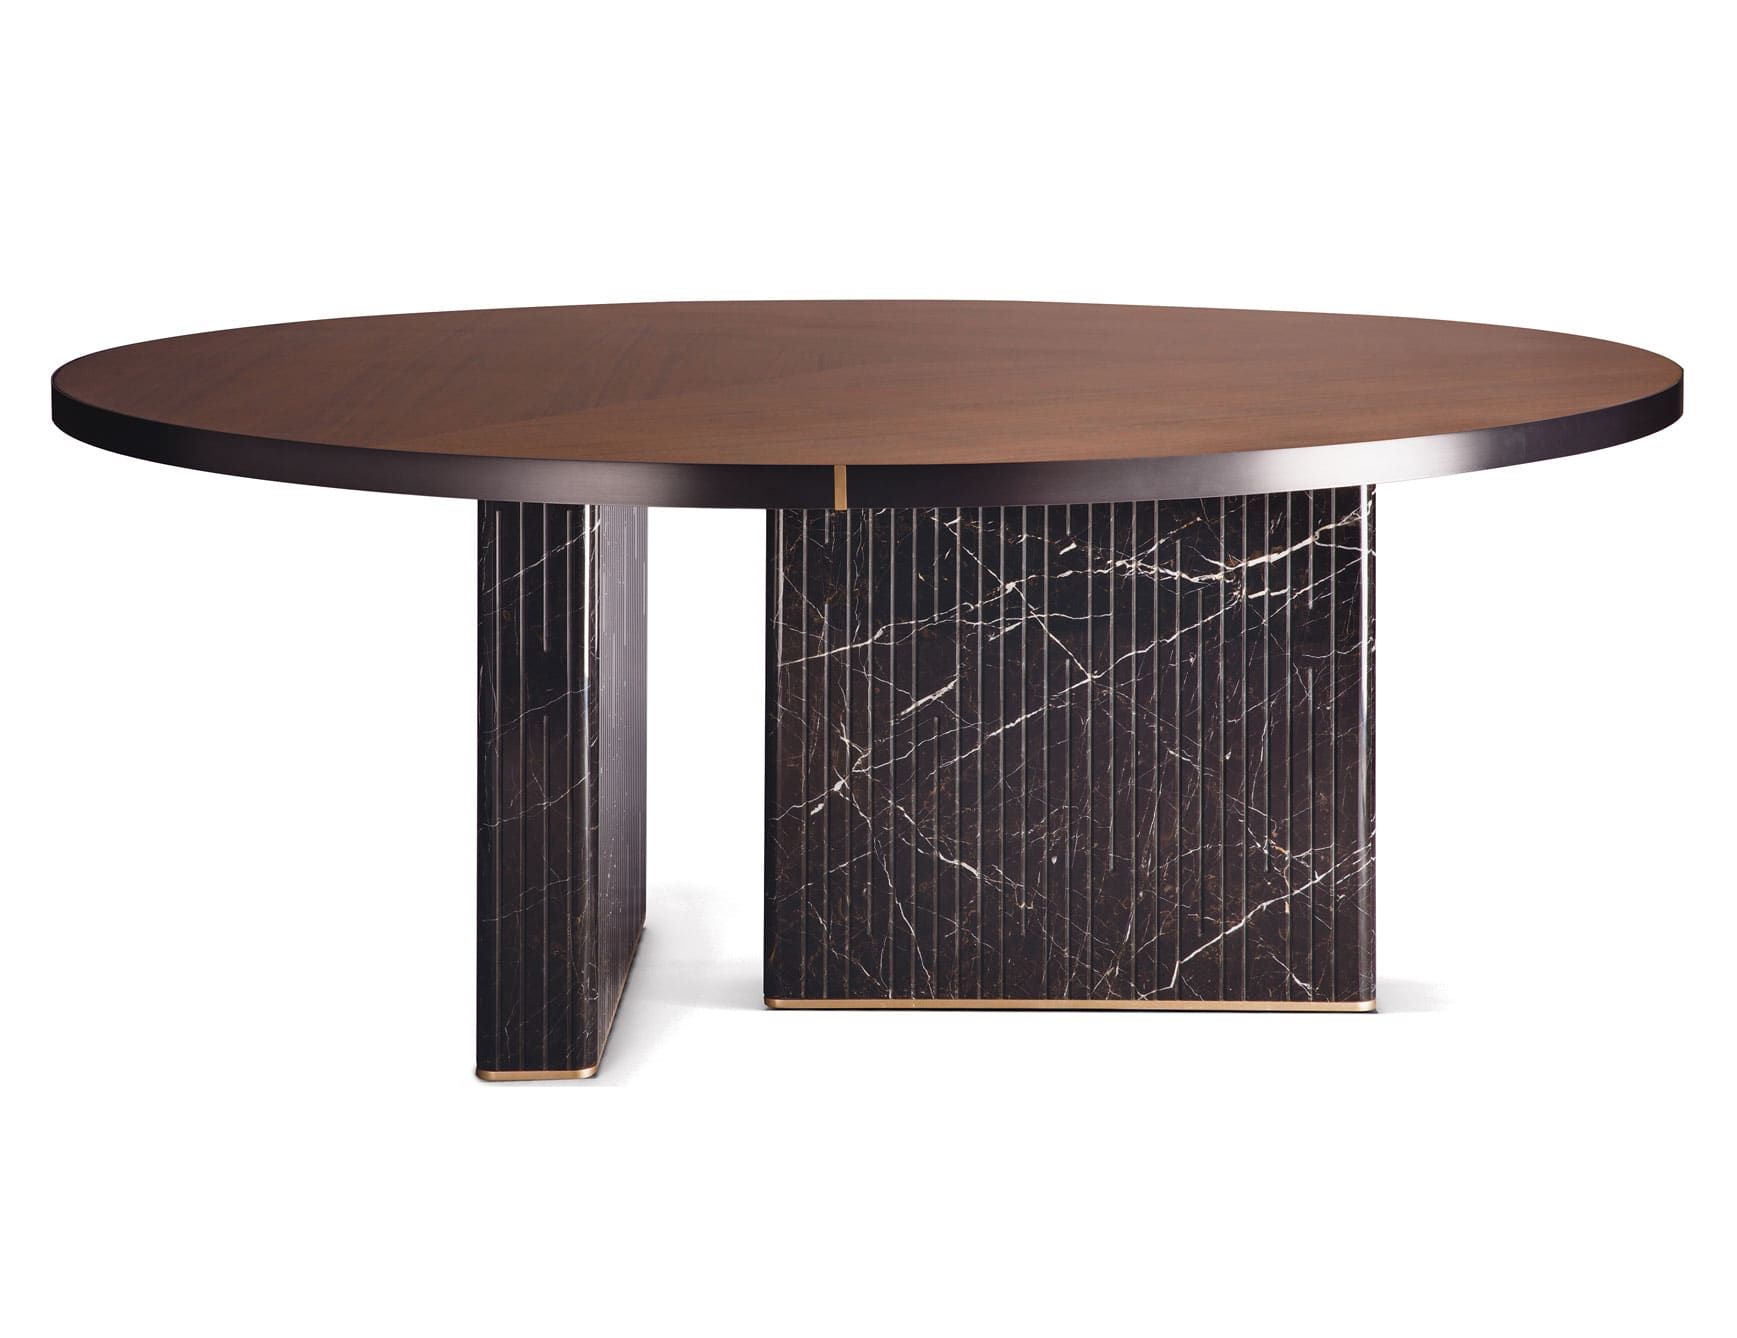 Nettuno modern luxury table with brown Carnico marble